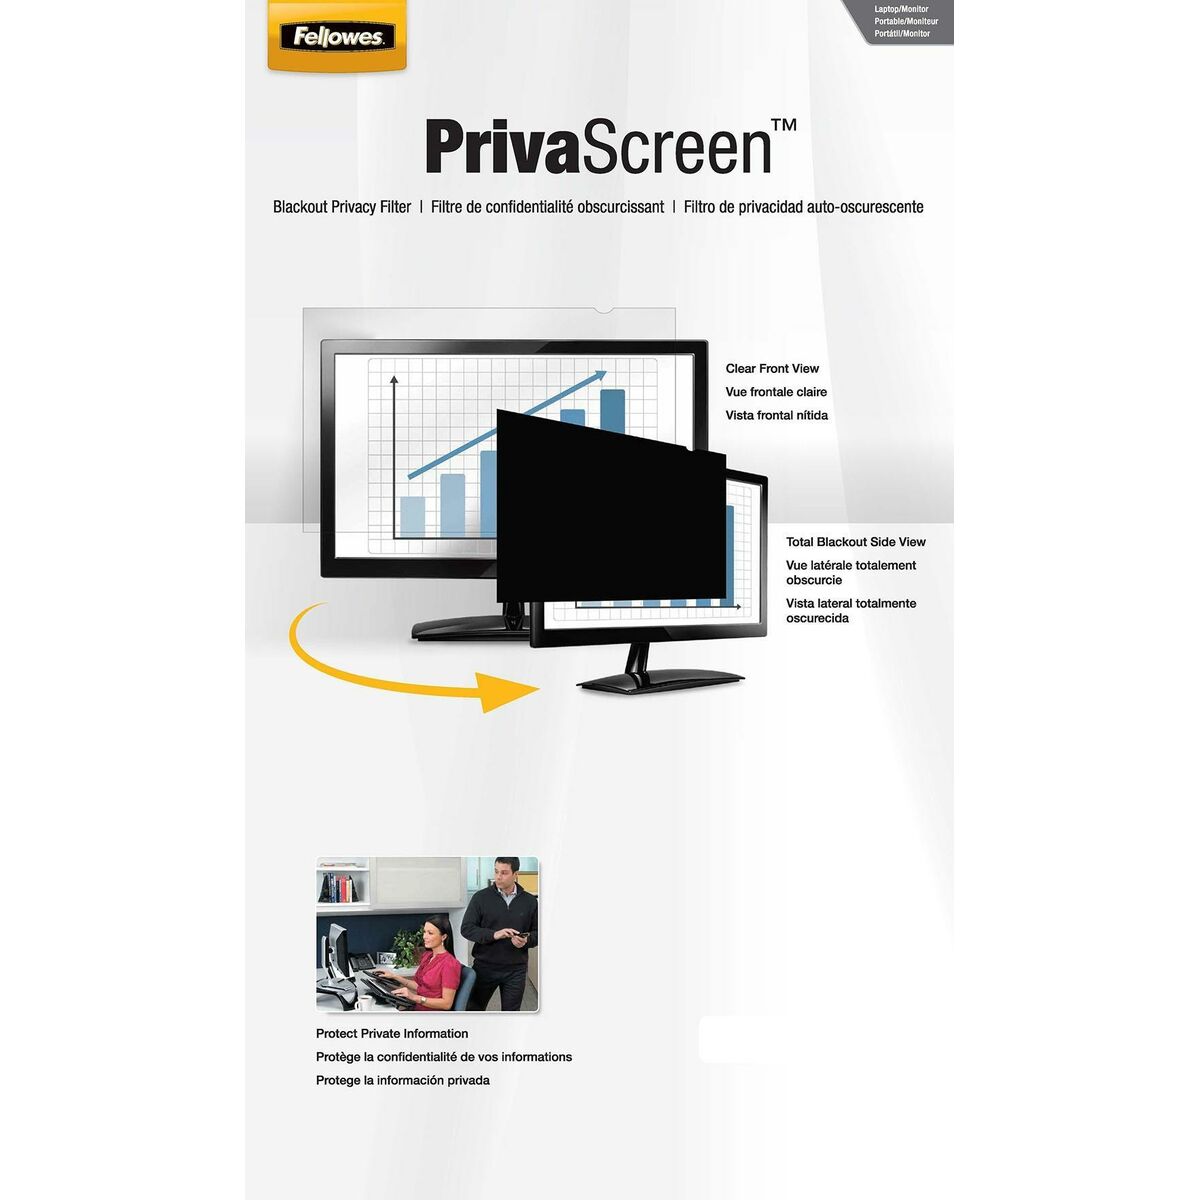 Privacy Filter for Monitor Fellowes PrivaScreen, Fellowes, Computing, Accessories, privacy-filter-for-monitor-fellowes-privascreen-2, Brand_Fellowes, category-reference-2609, category-reference-2642, category-reference-2644, category-reference-t-19685, category-reference-t-19908, category-reference-t-21342, computers / peripherals, Condition_NEW, office, Price_50 - 100, Teleworking, RiotNook